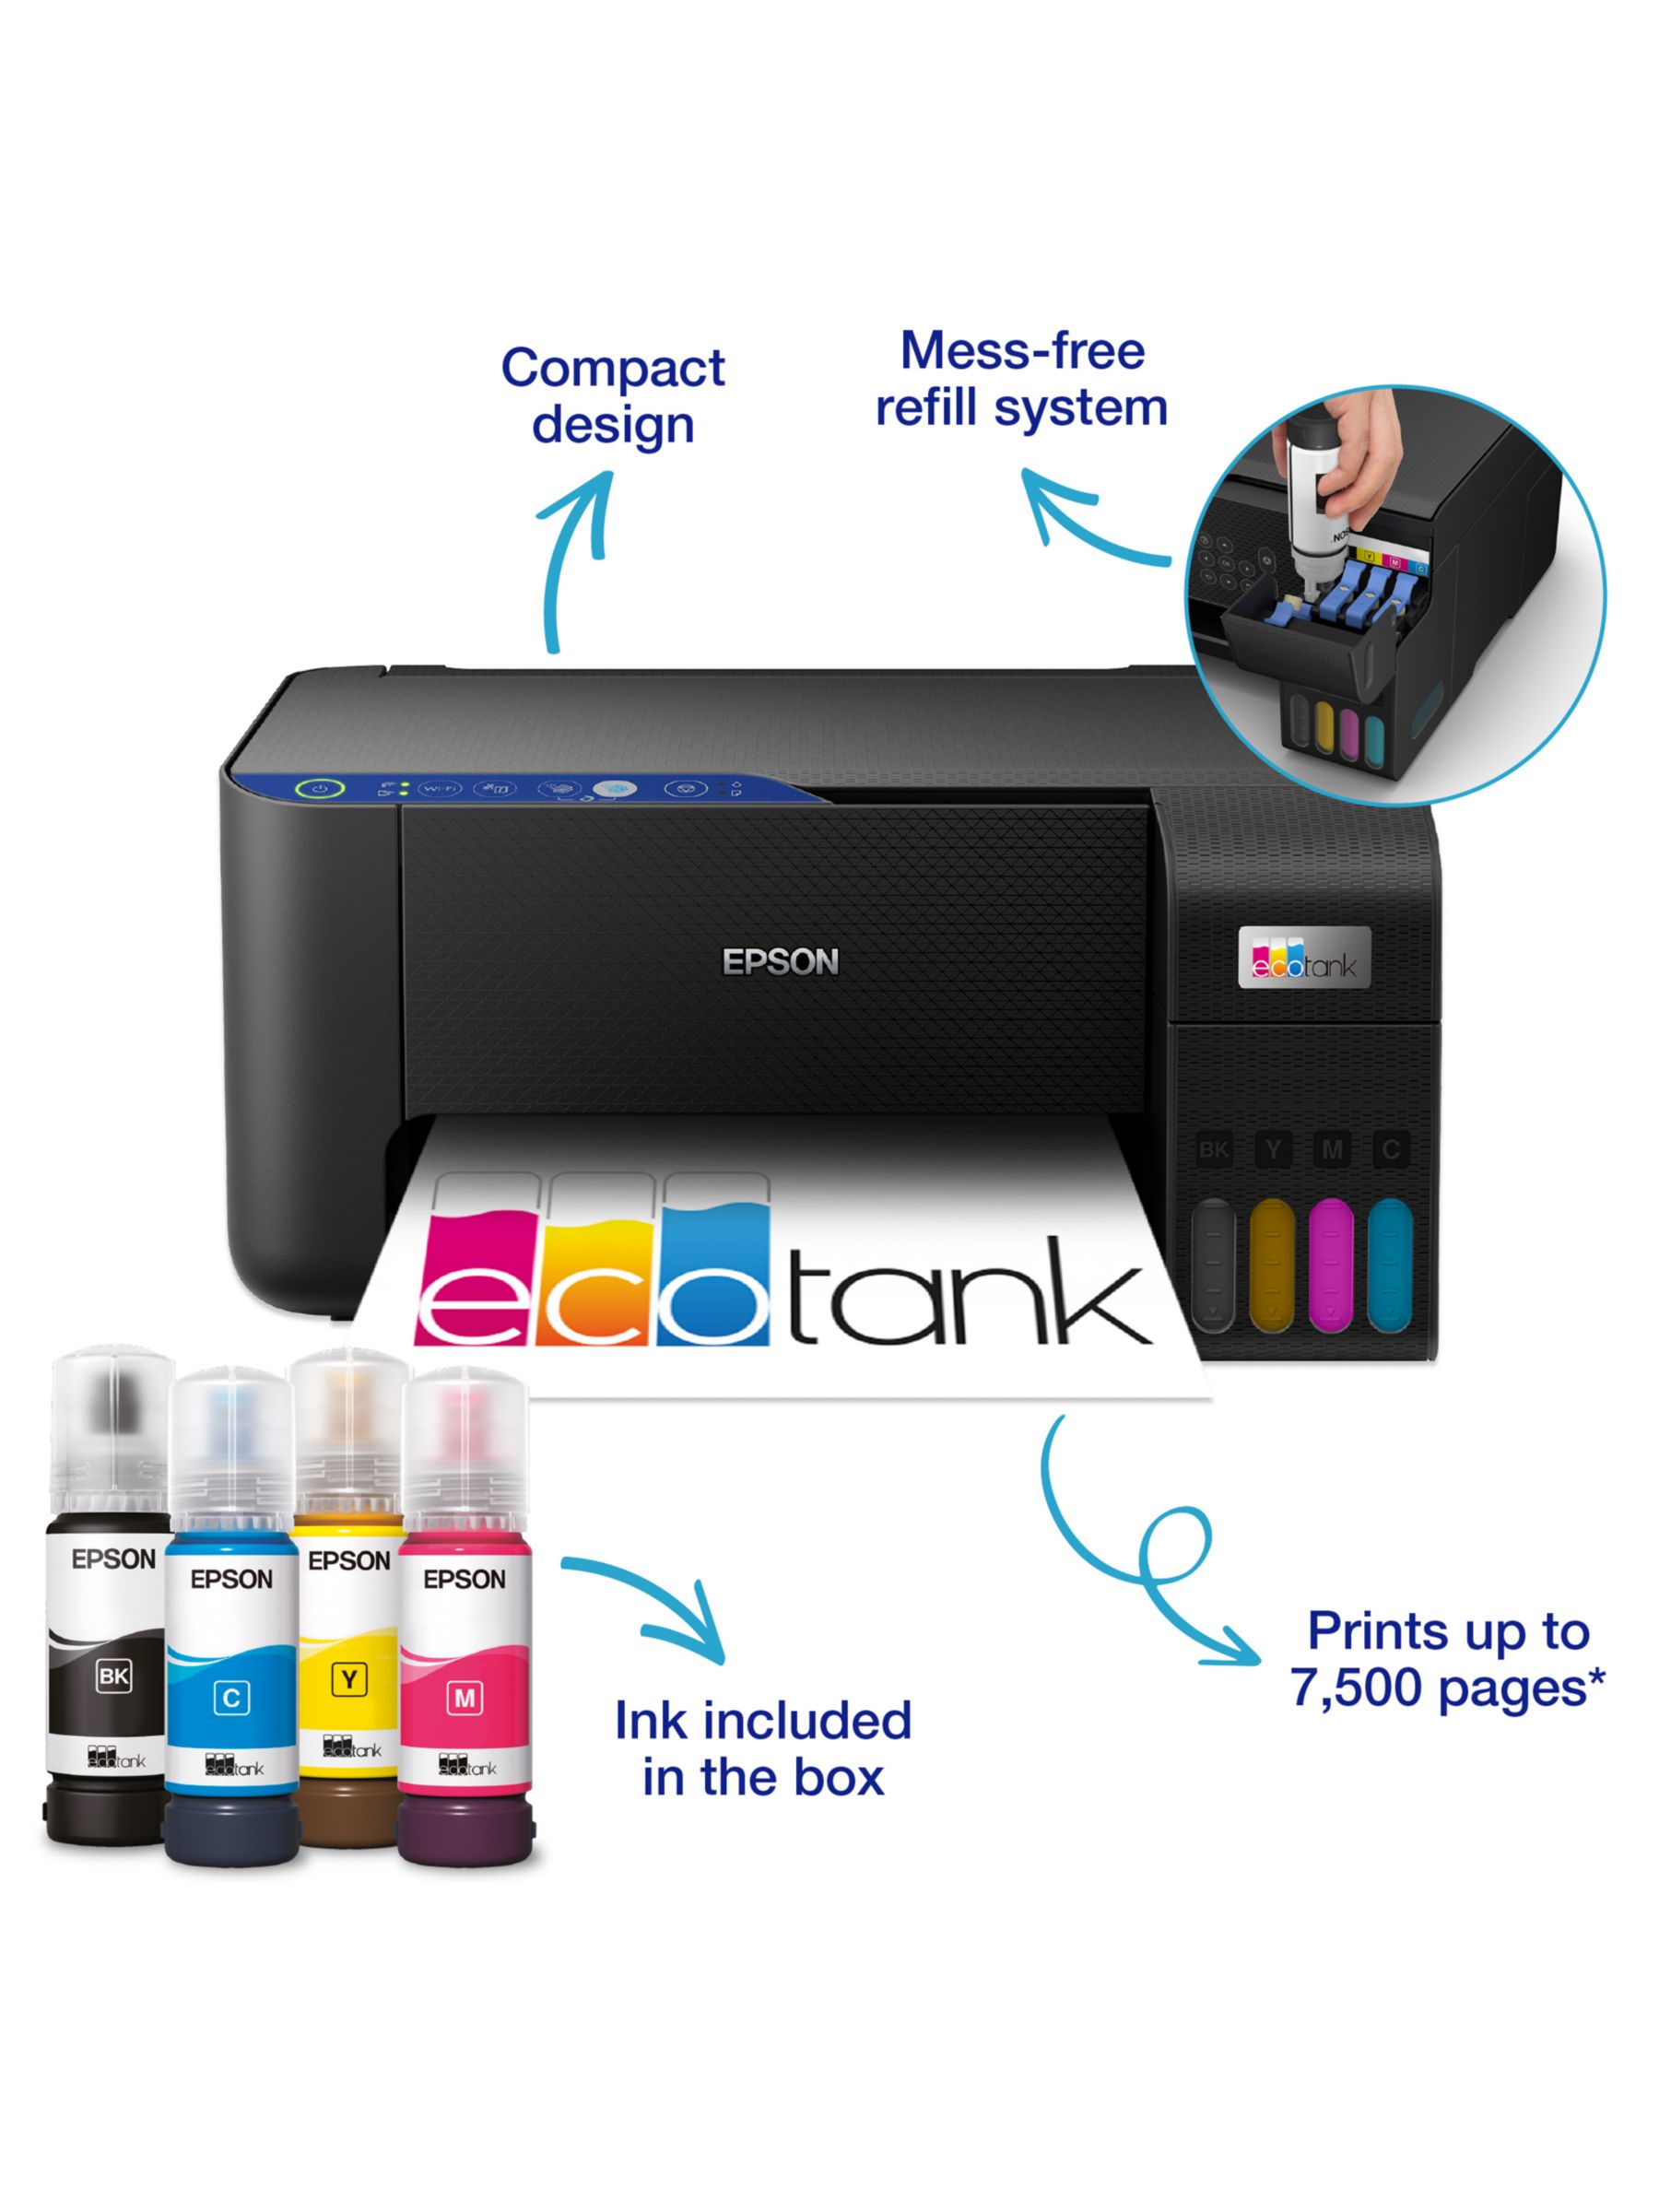 EcoTank ET-2811 Three-In-One Wi-Fi Printer with High Capacity Integrated Ink Tank